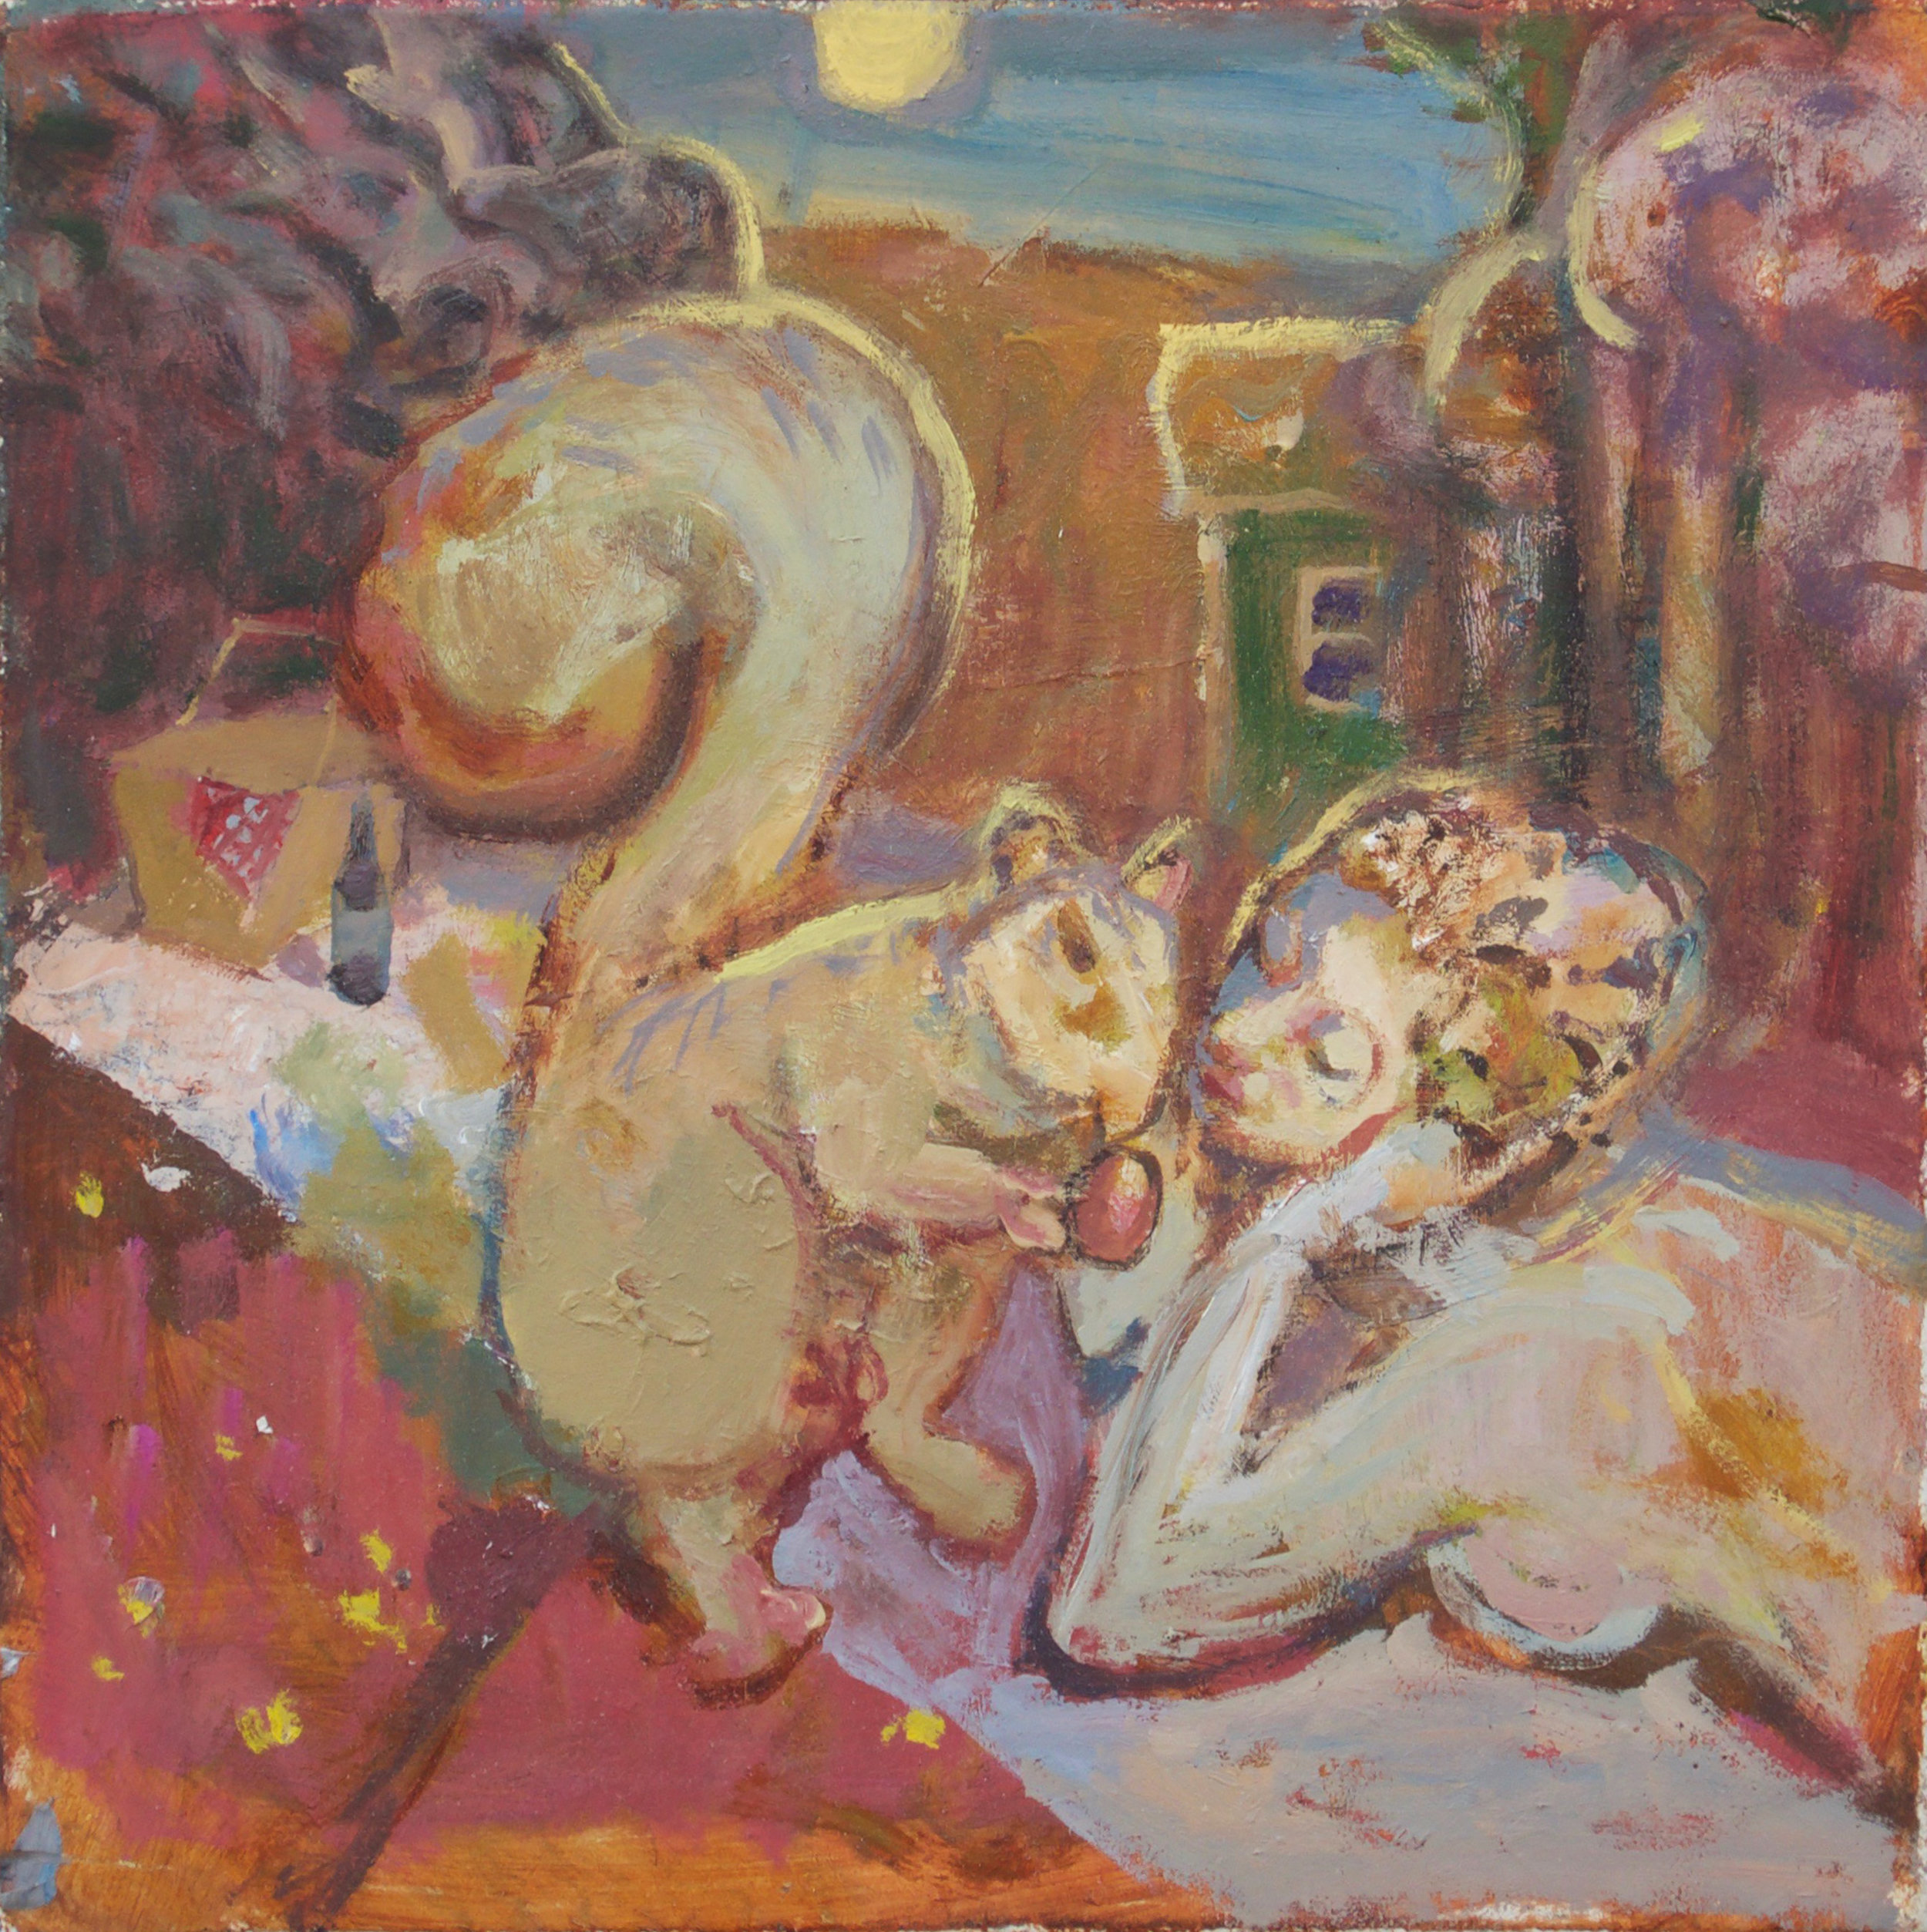 Sharing a Nut, 10" x 10", Oil on board, 2015